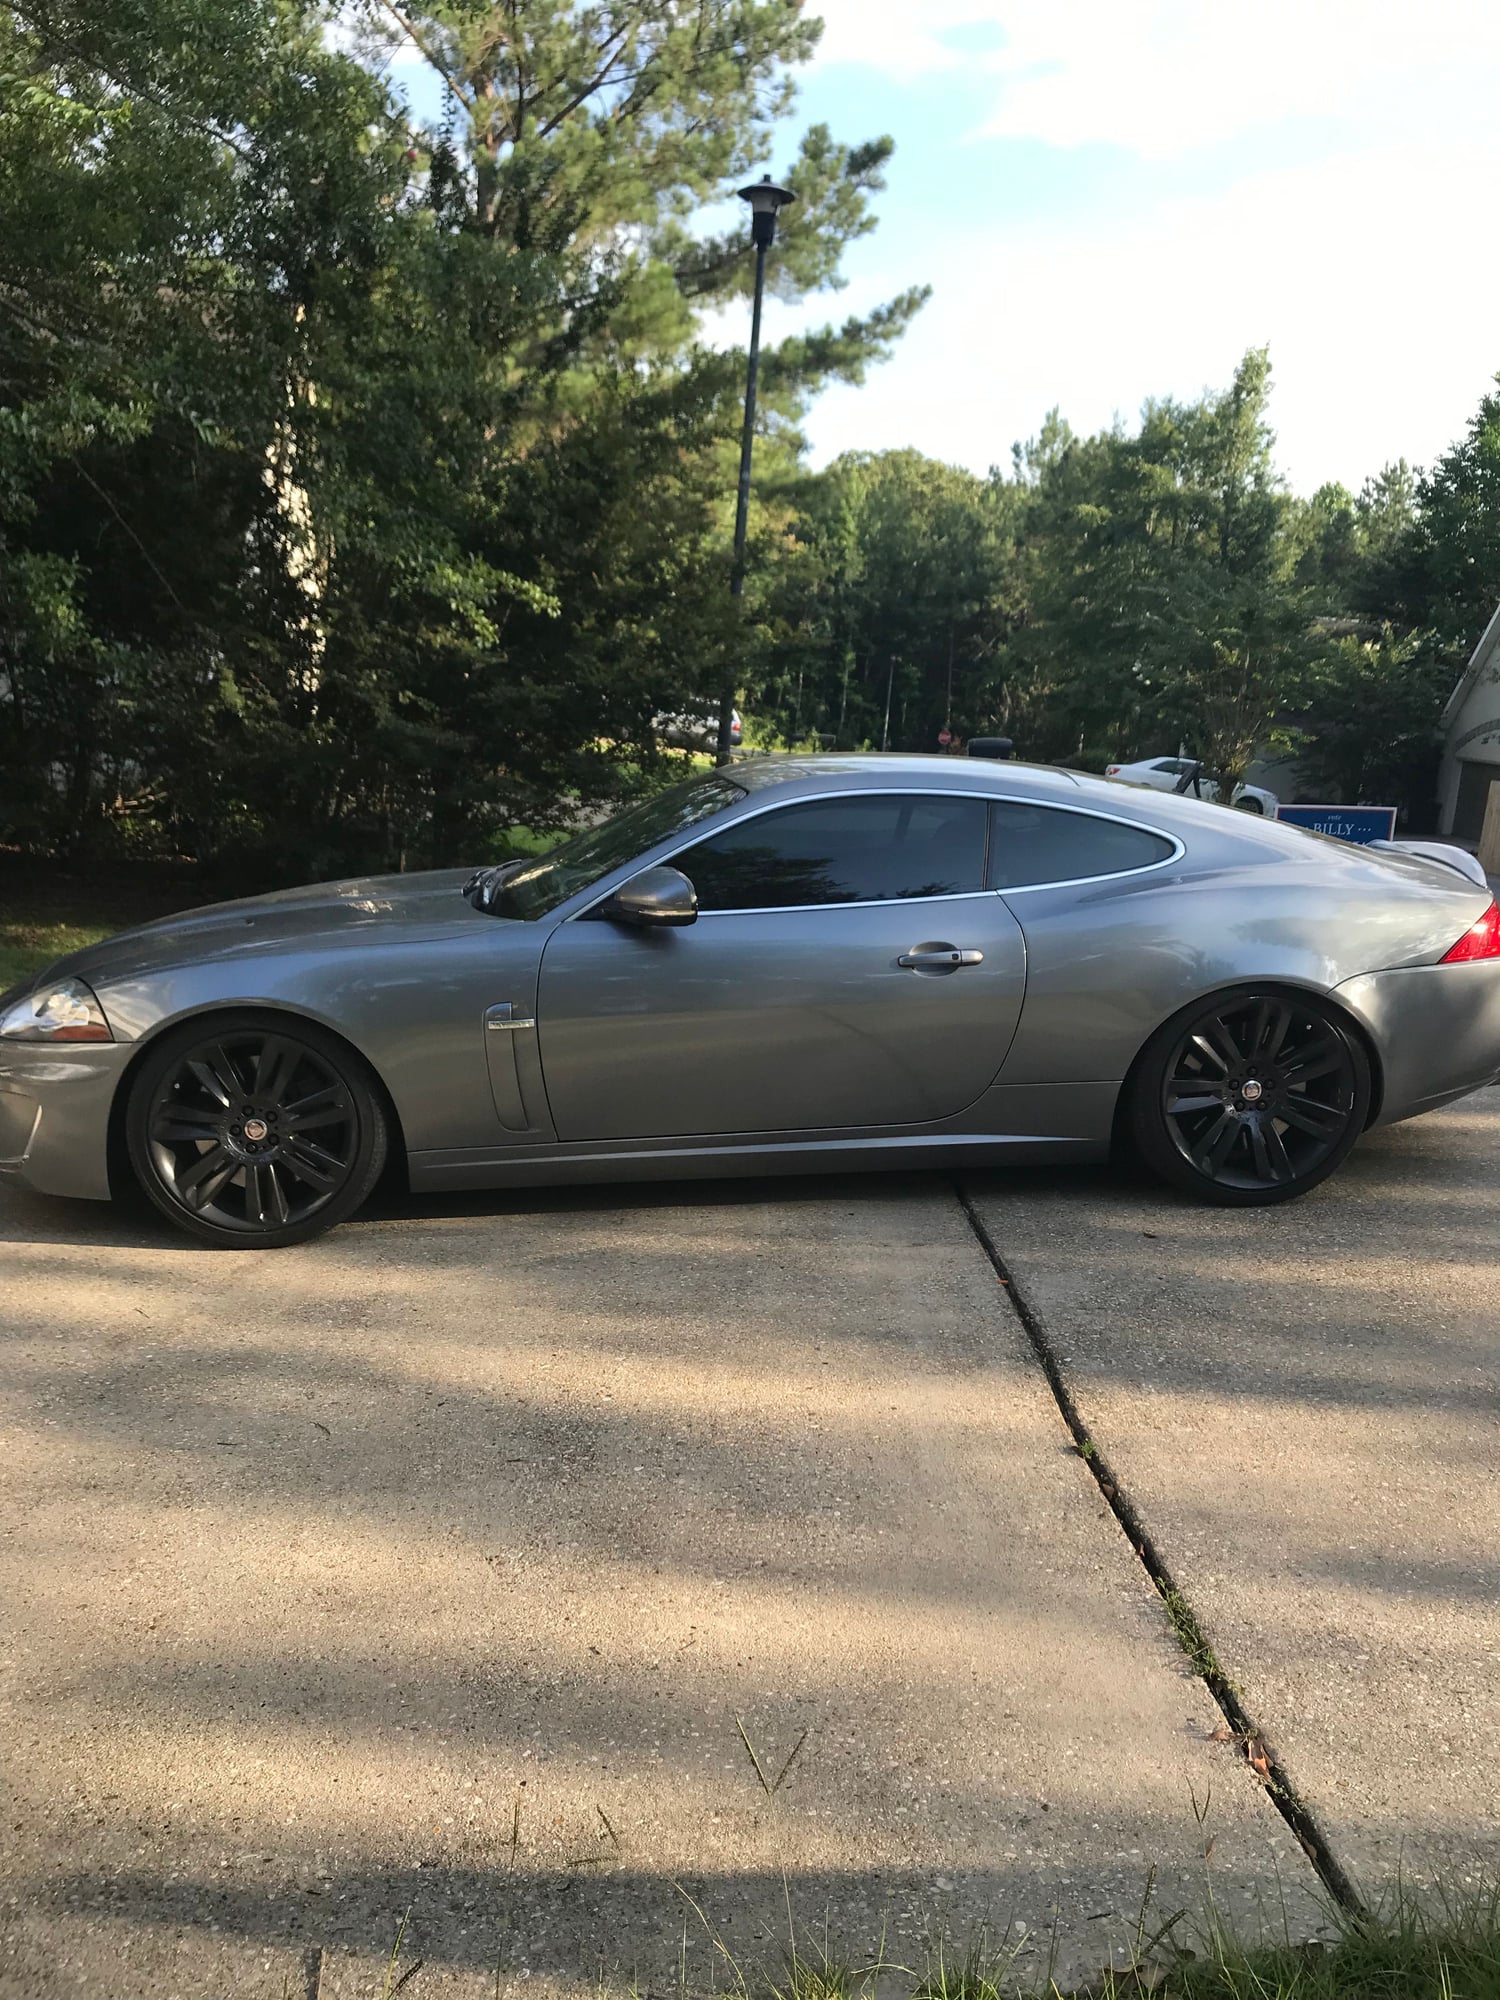 Wheels and Tires/Axles - 20" XKR Nevis Wheels & Tires - Used - 2010 to 2015 Jaguar XKR - 2010 to 2015 Jaguar XFR - Purvis, MS 39475, United States